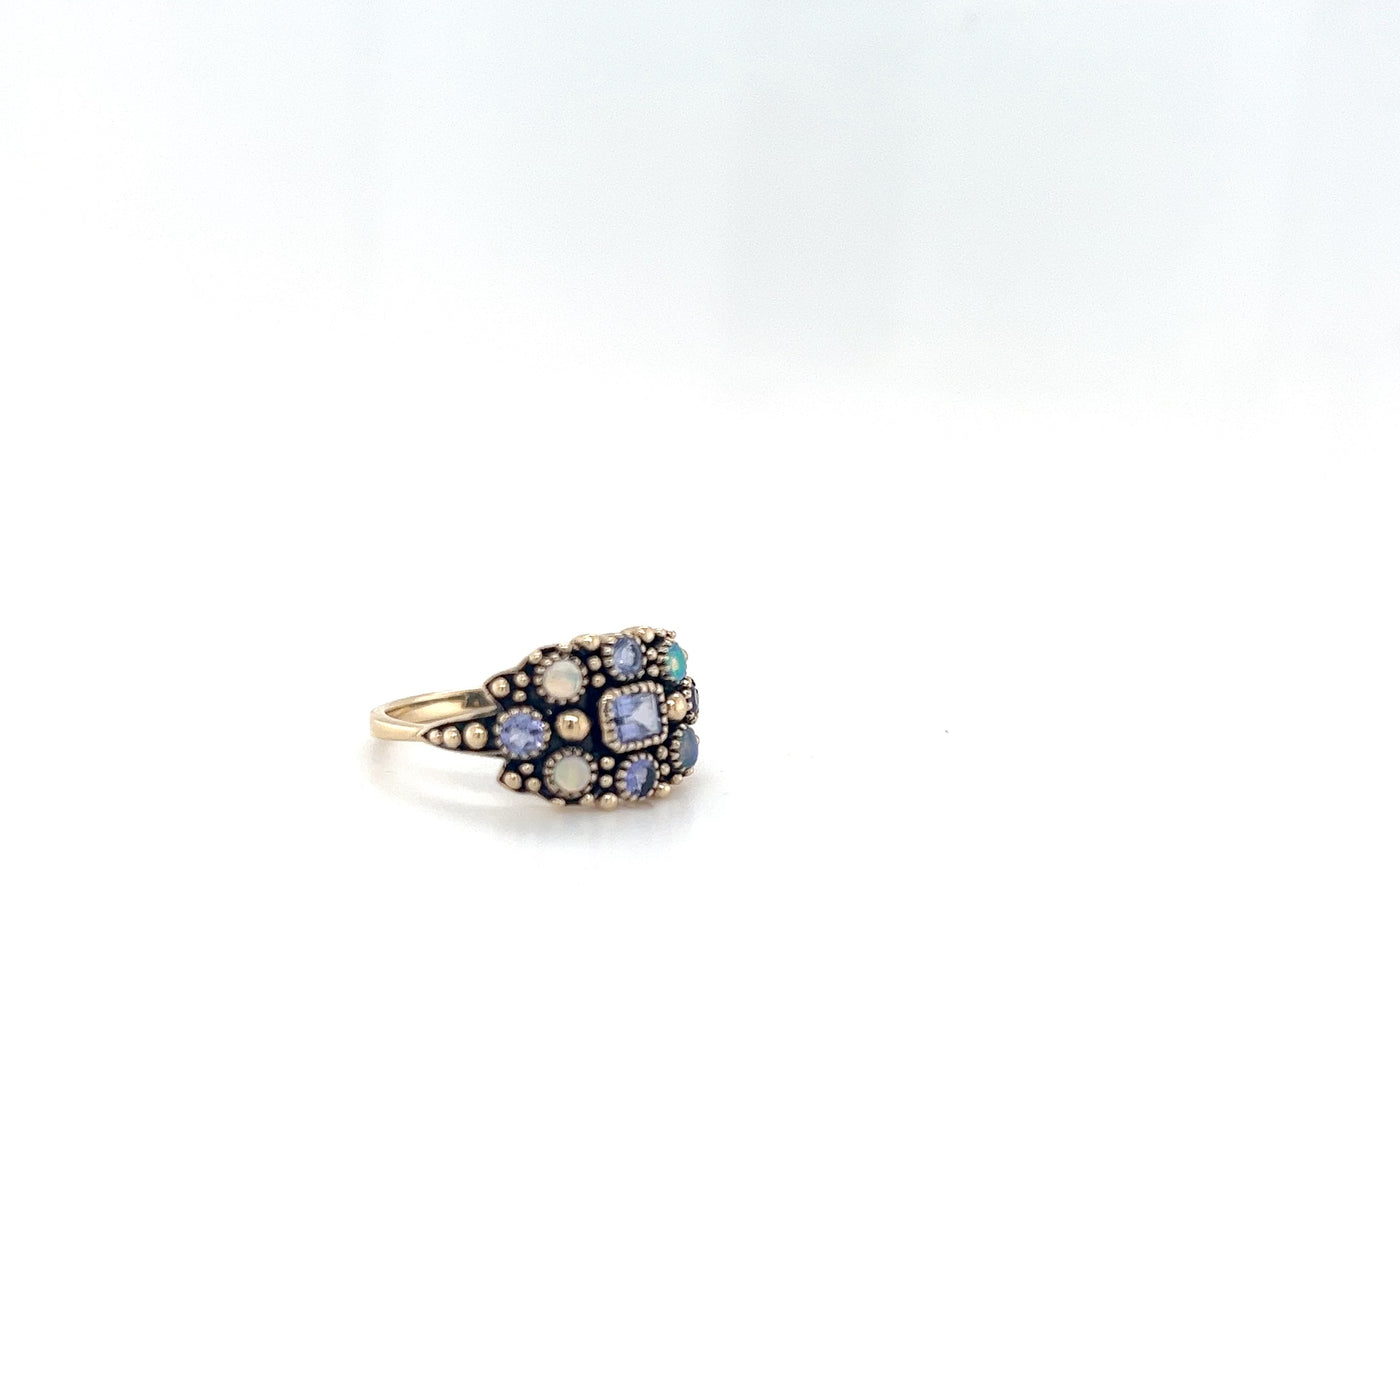 9 Carat Yellow Gold Ring with Tanzanite and Solid Opal.